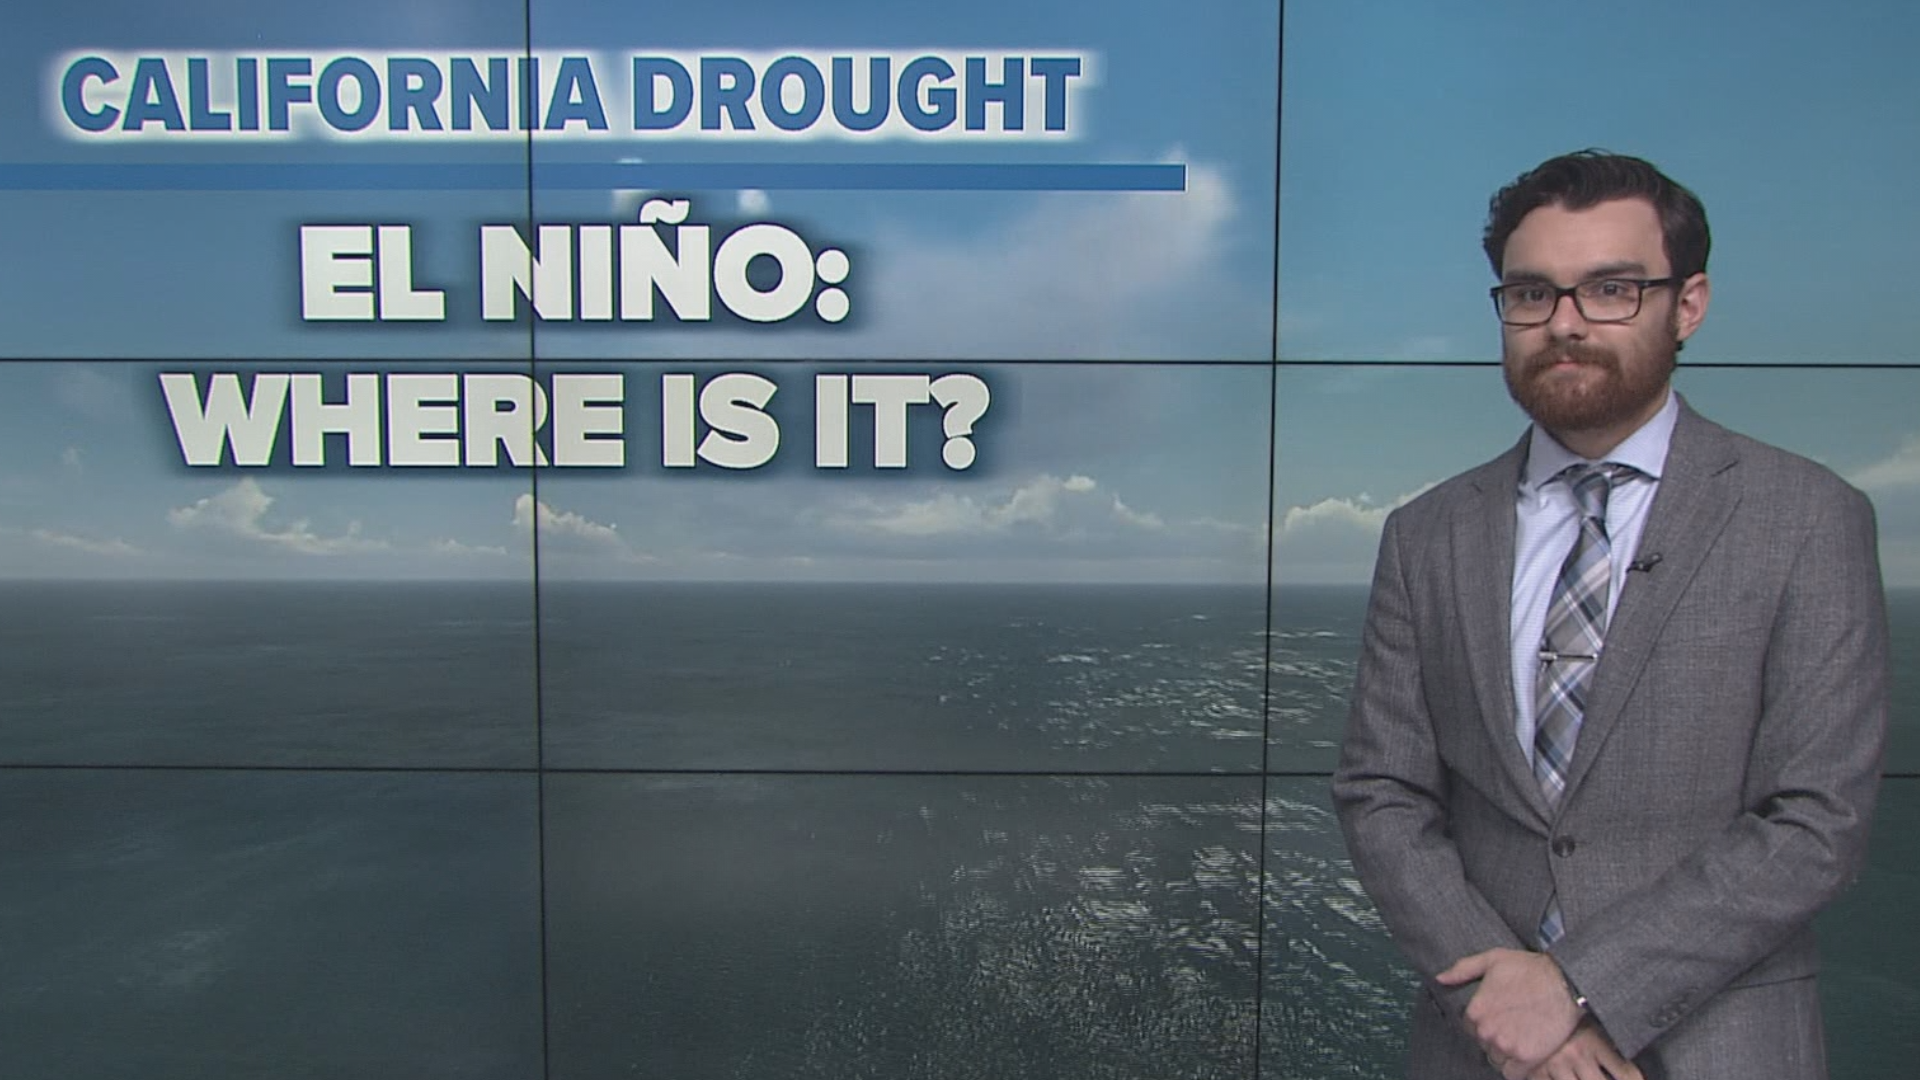 El Niño replaced La Niña a few months ago, but has since stalled out. ABC10 meteorologist looks at why this happened, and what it means for California going forward.